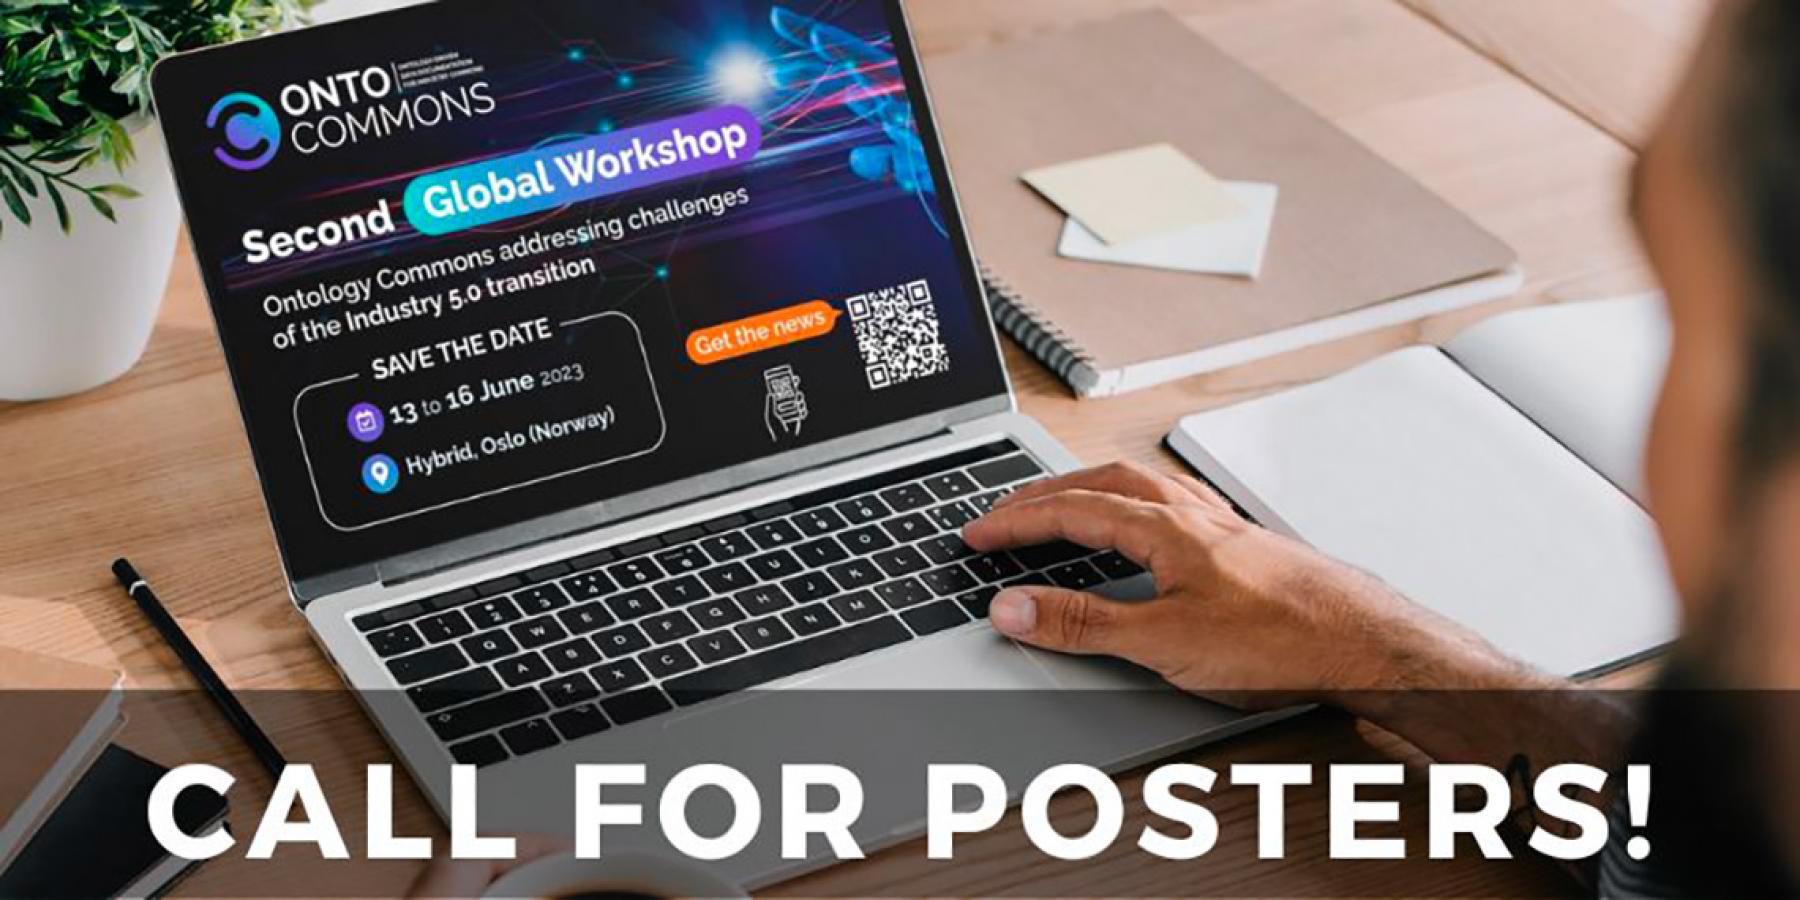 OntoCommons Second Global Workshop: Call for Posters